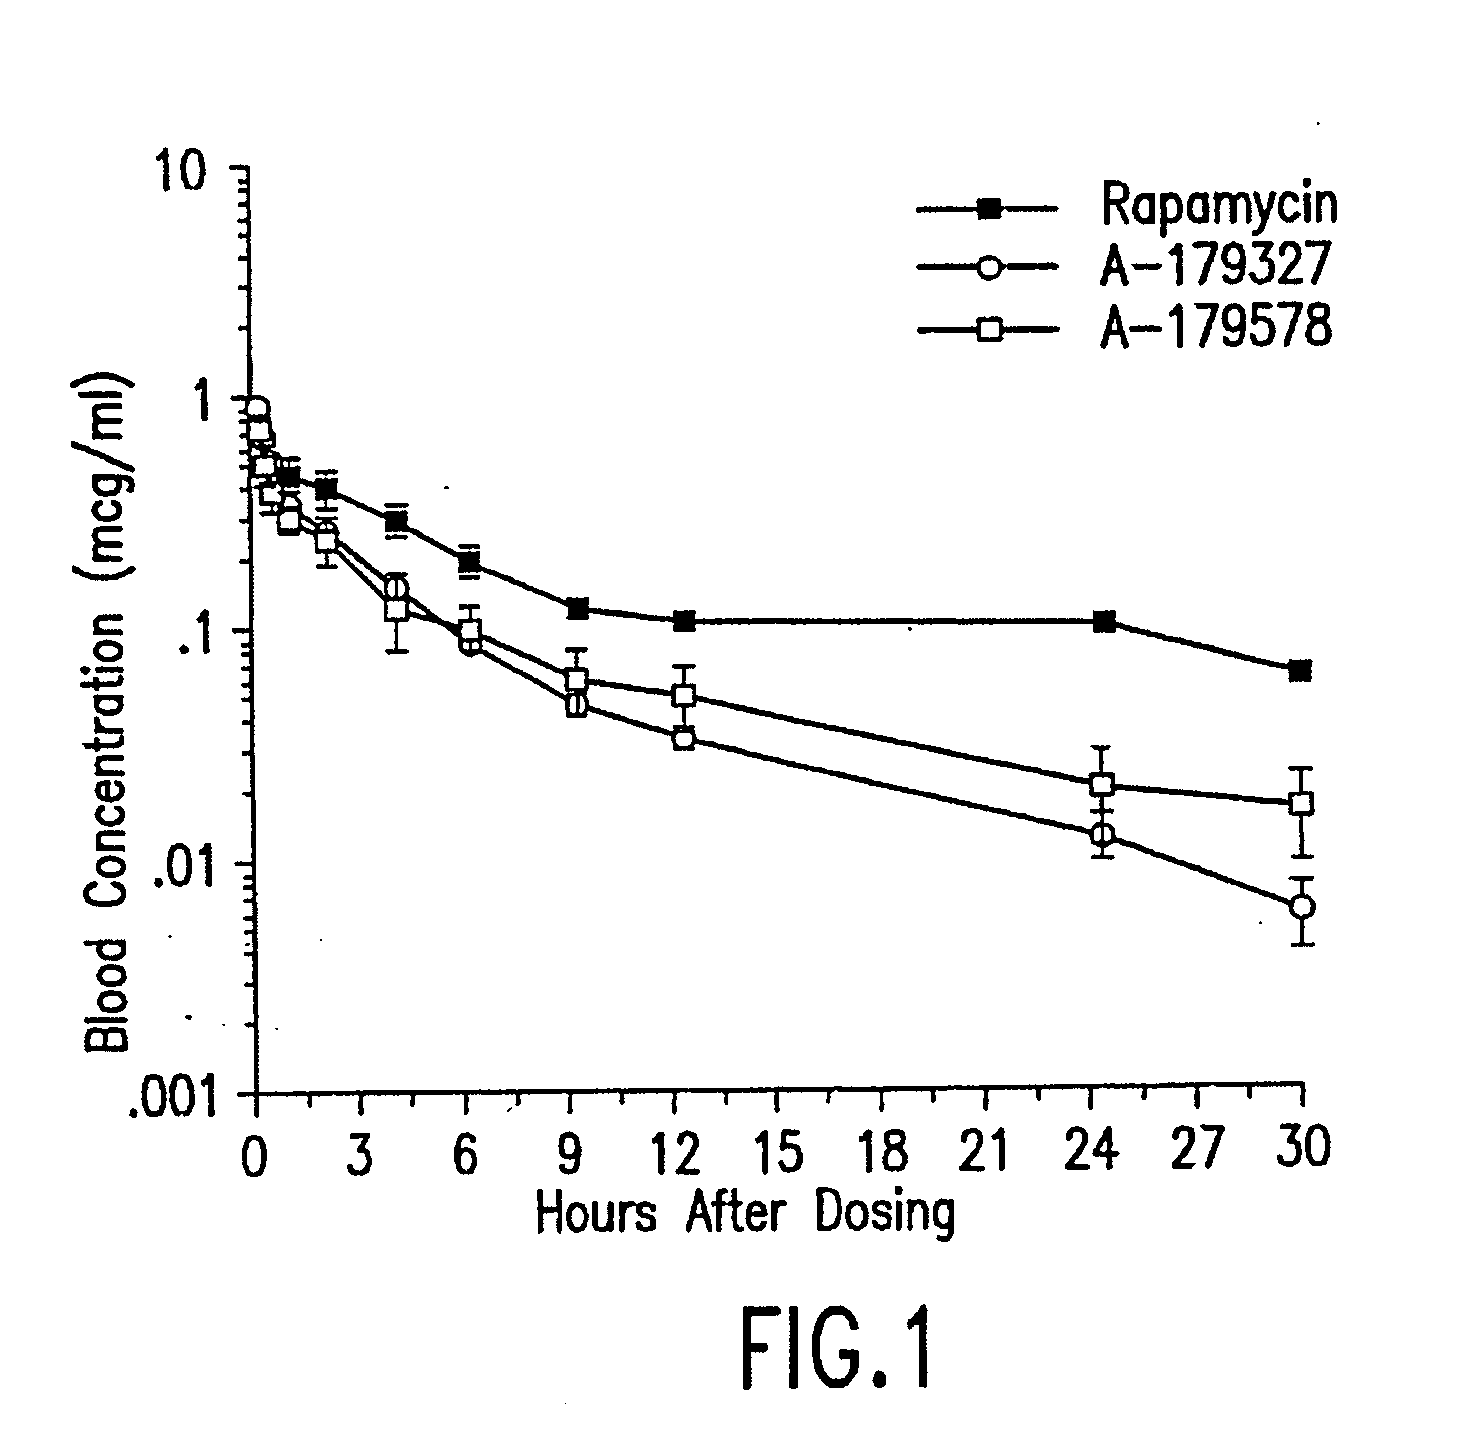 Medical devices containing rapamycin analogs